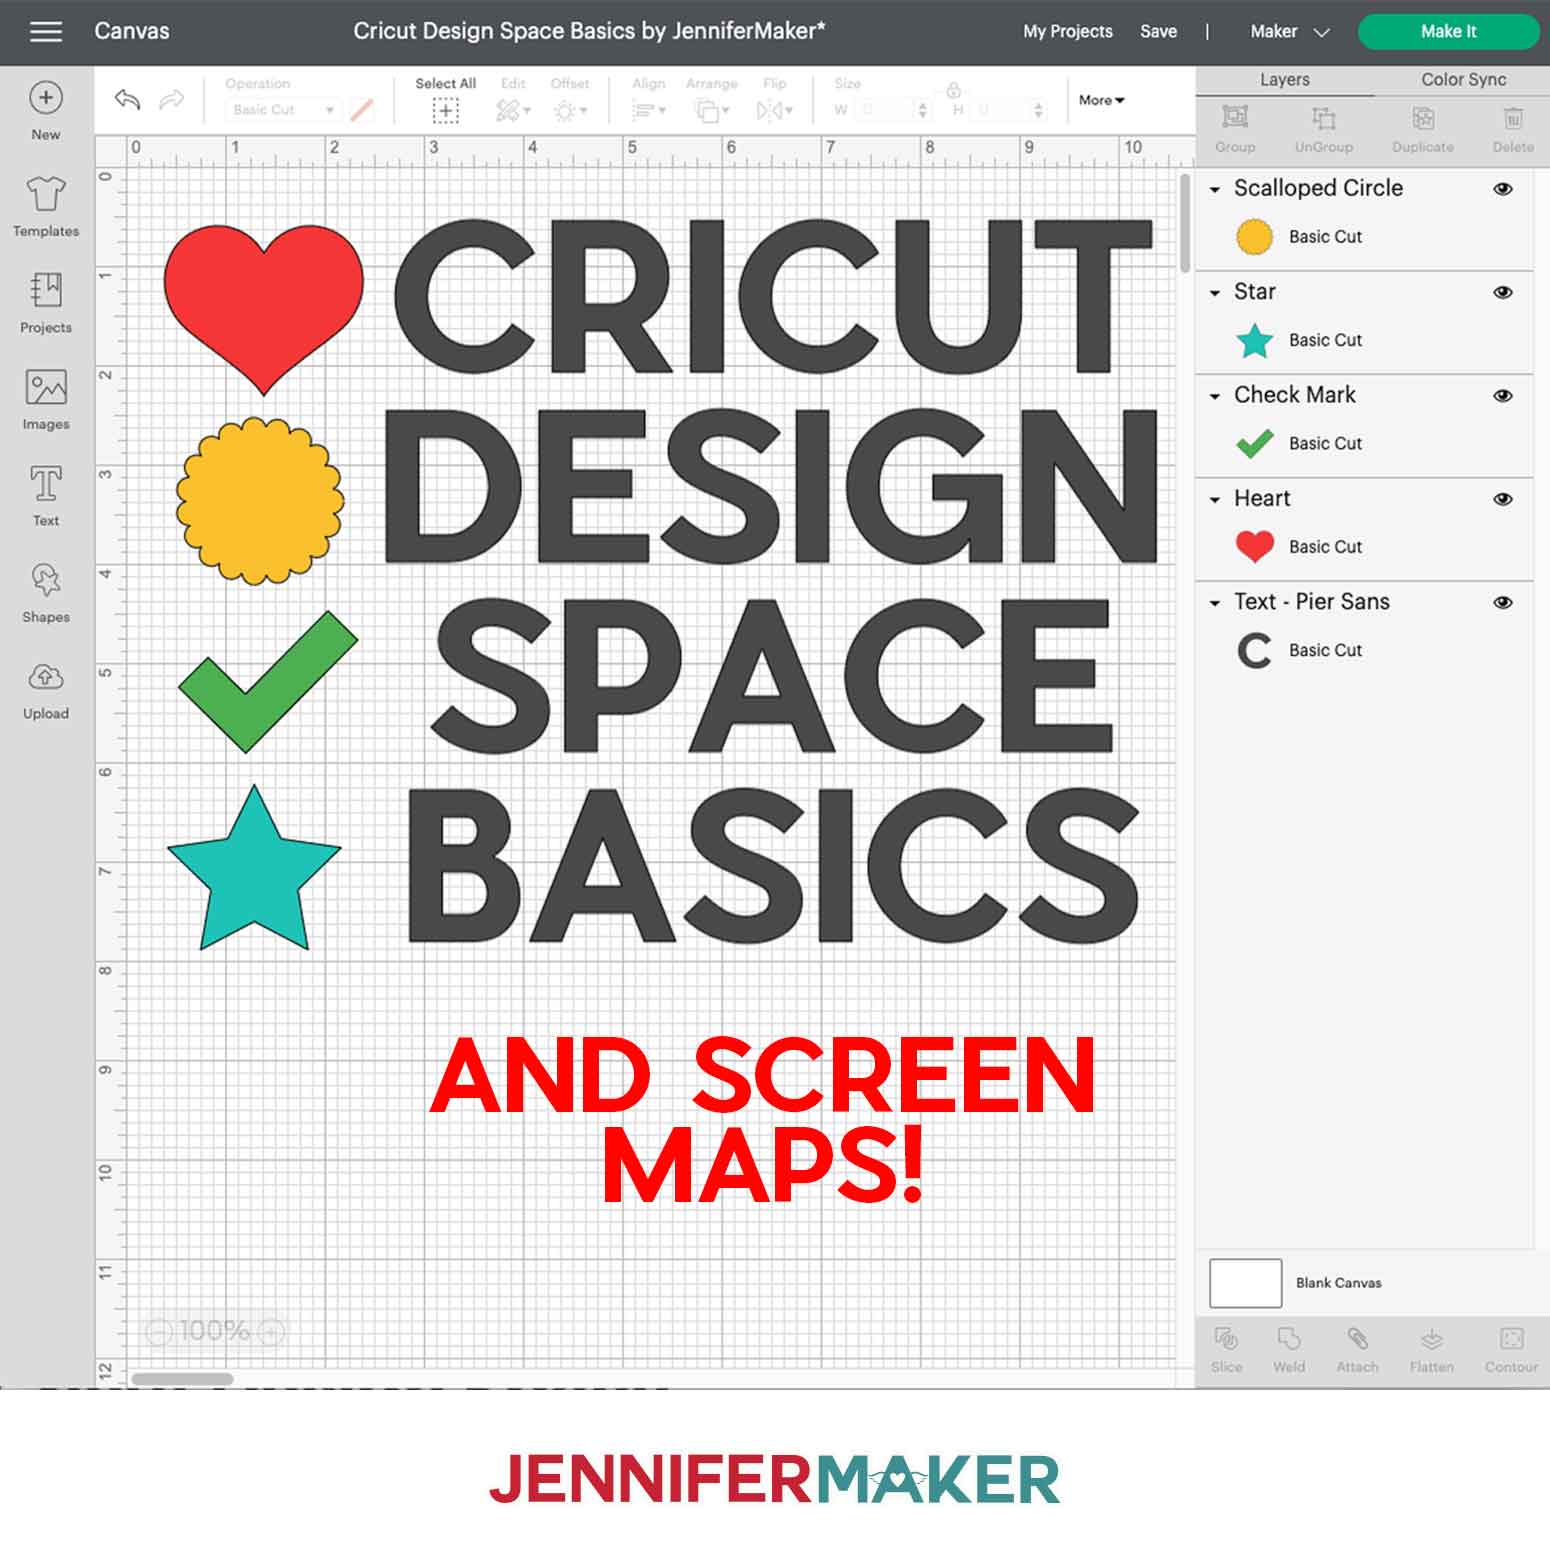 Cricut Design Space Basics, Tips, Tricks, Screen Maps, and More by JenniferMaker